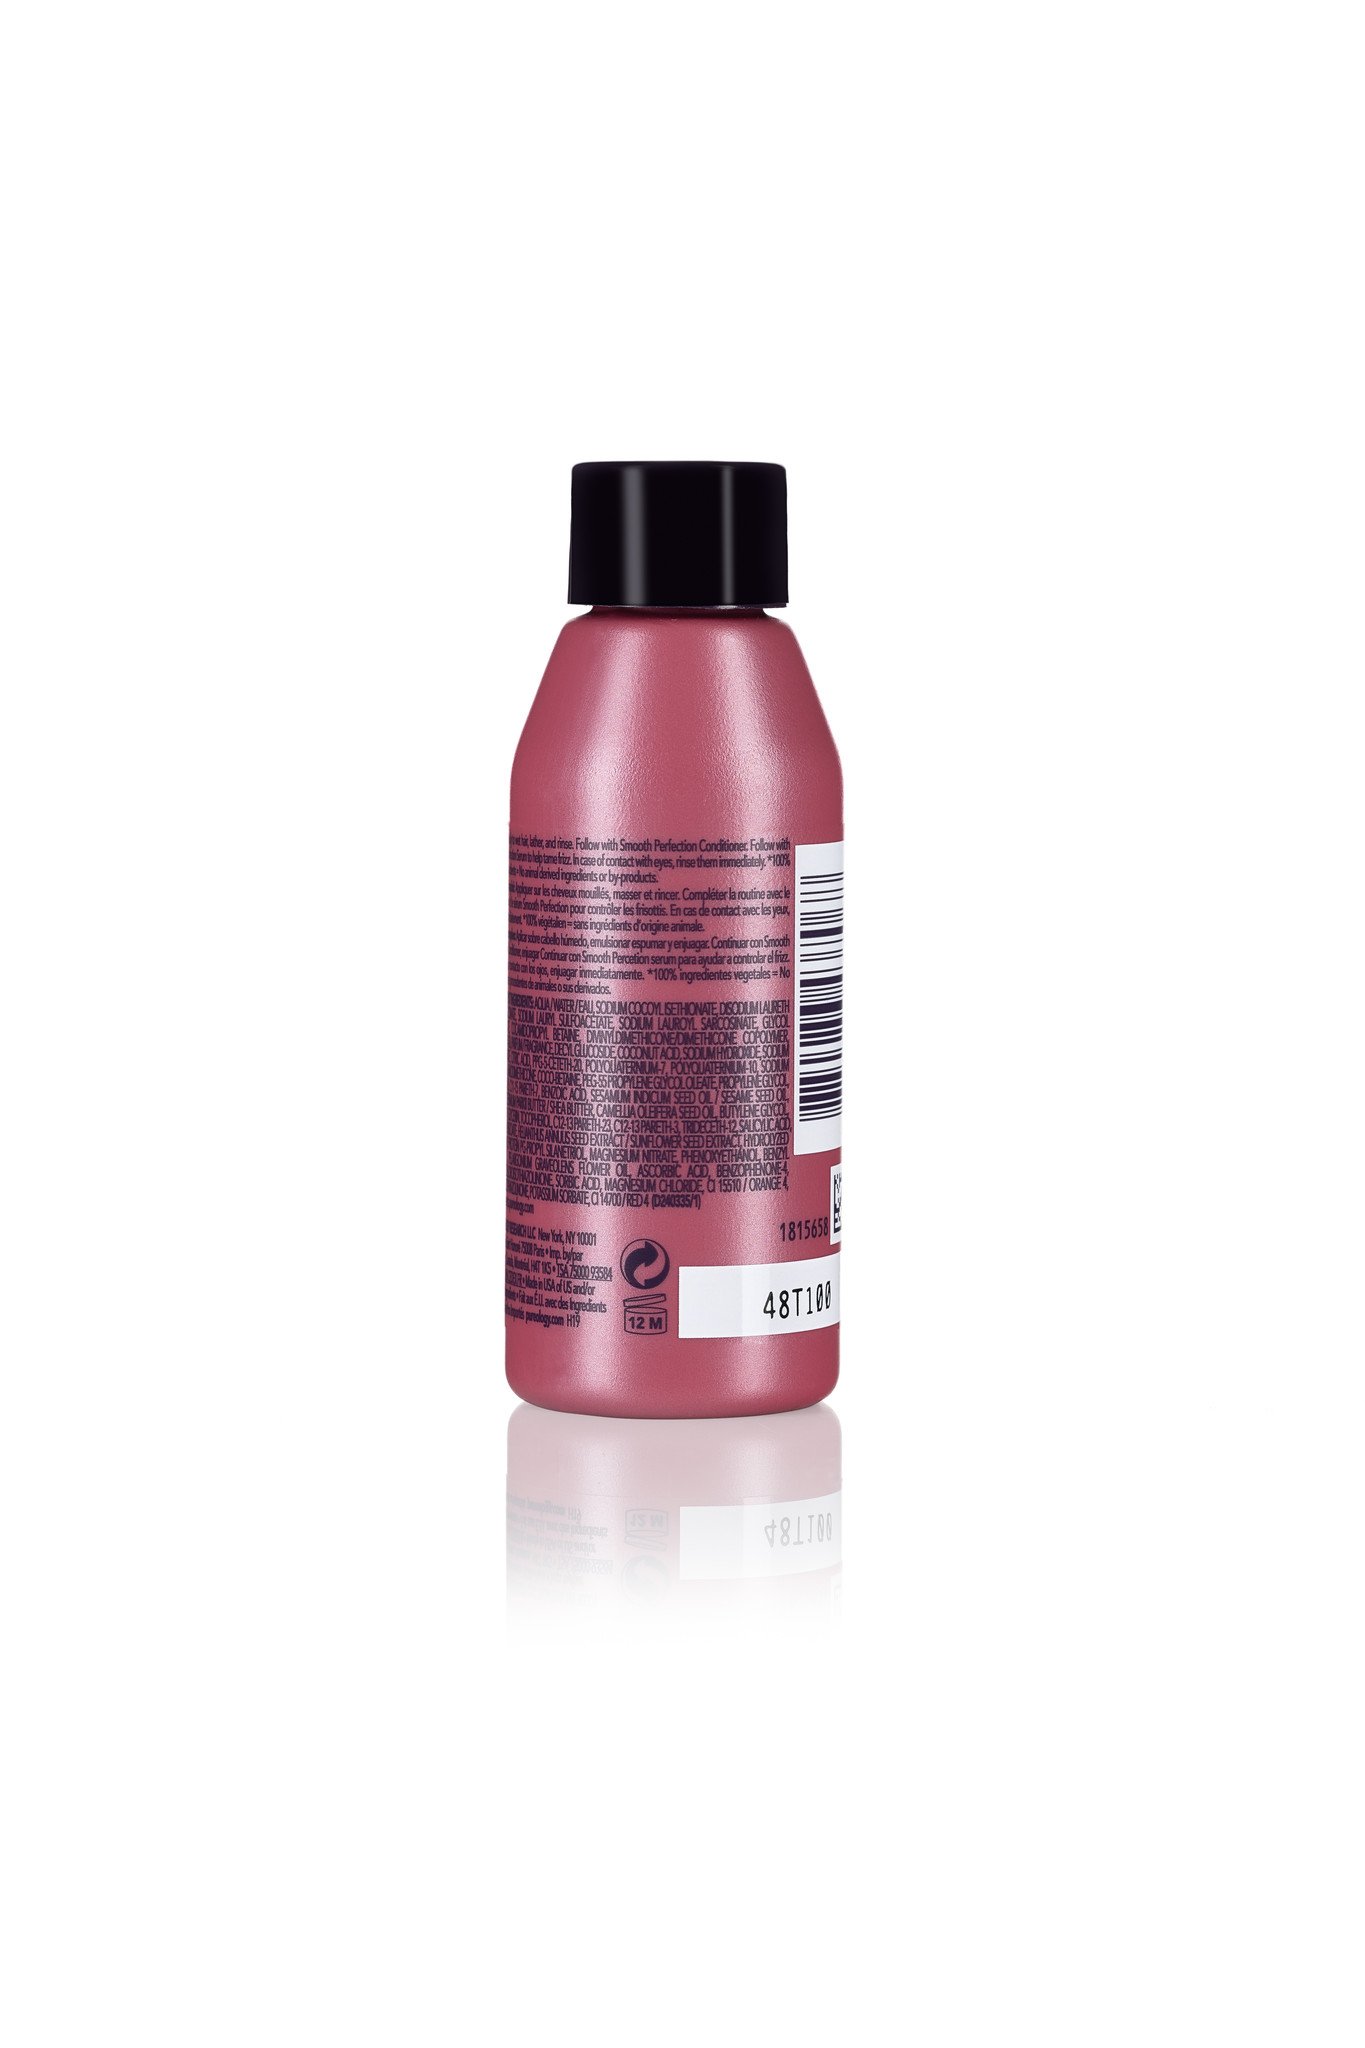 Pureology Smooth Perfection Shampoo 1000ml - FREE Delivery